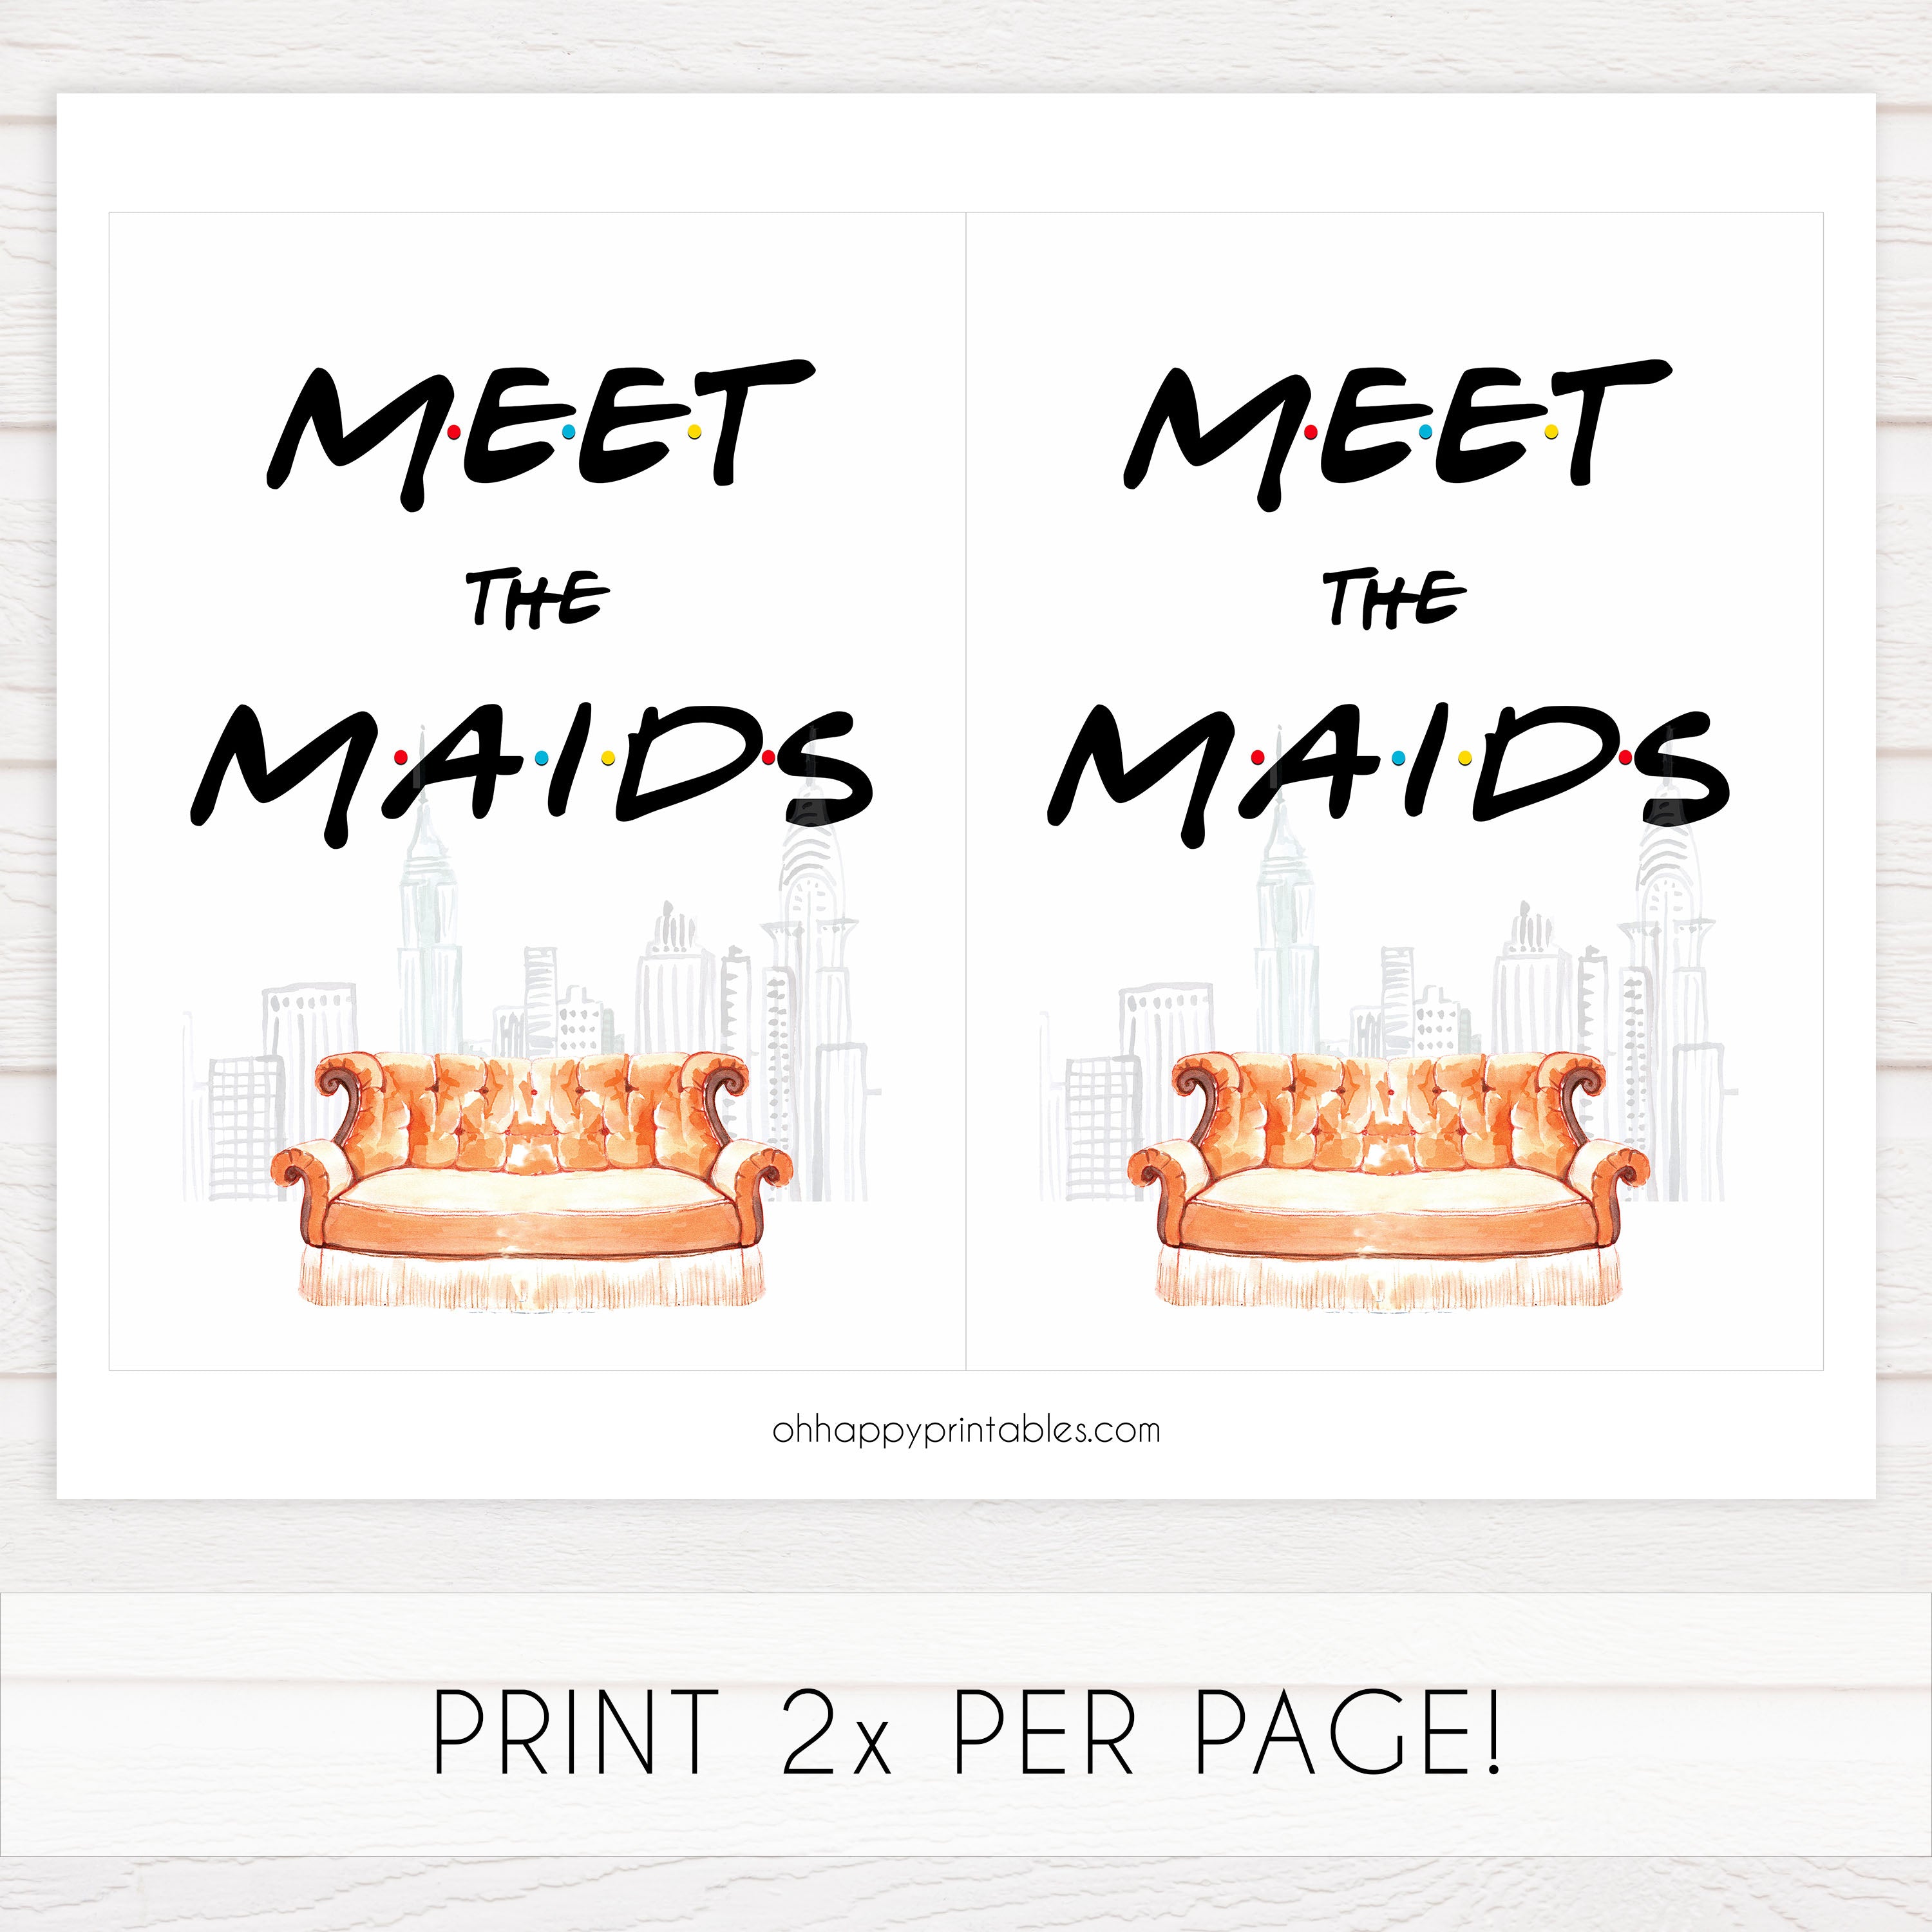 meet the maids sign, Printable bridal shower signs, friends bridal shower decor, friends bridal shower decor ideas, fun bridal shower decor, bridal shower game ideas, friends bridal shower ideas